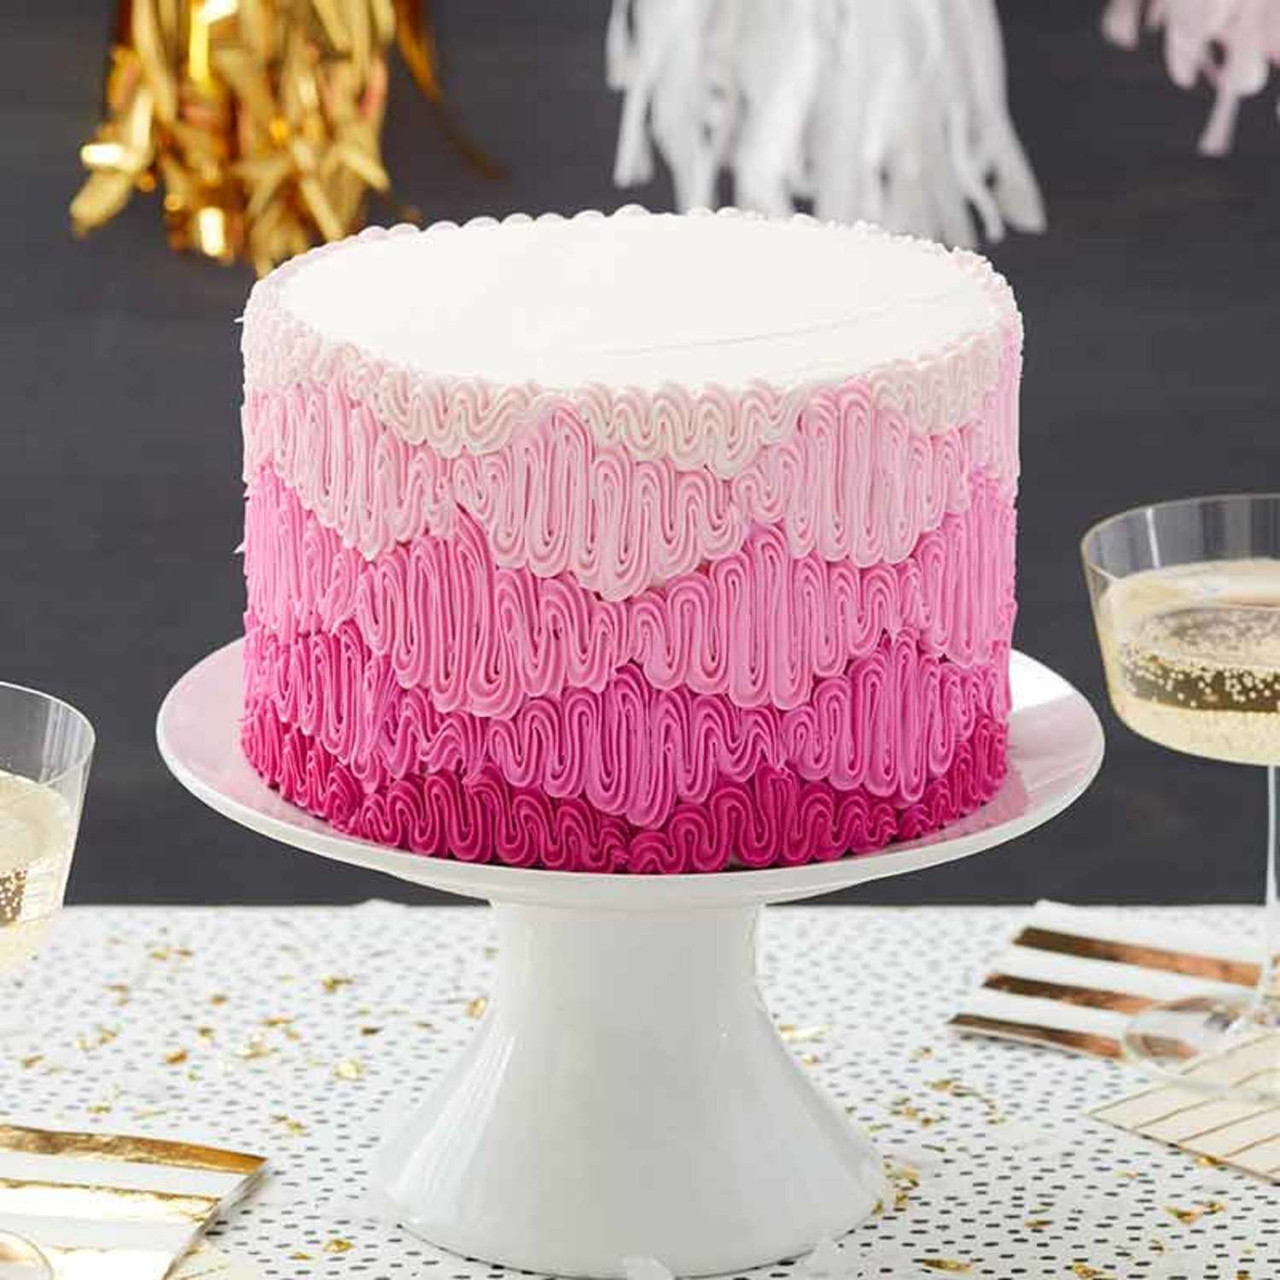 How to Make an Ombré Rosette Cake - My Kitchen Love